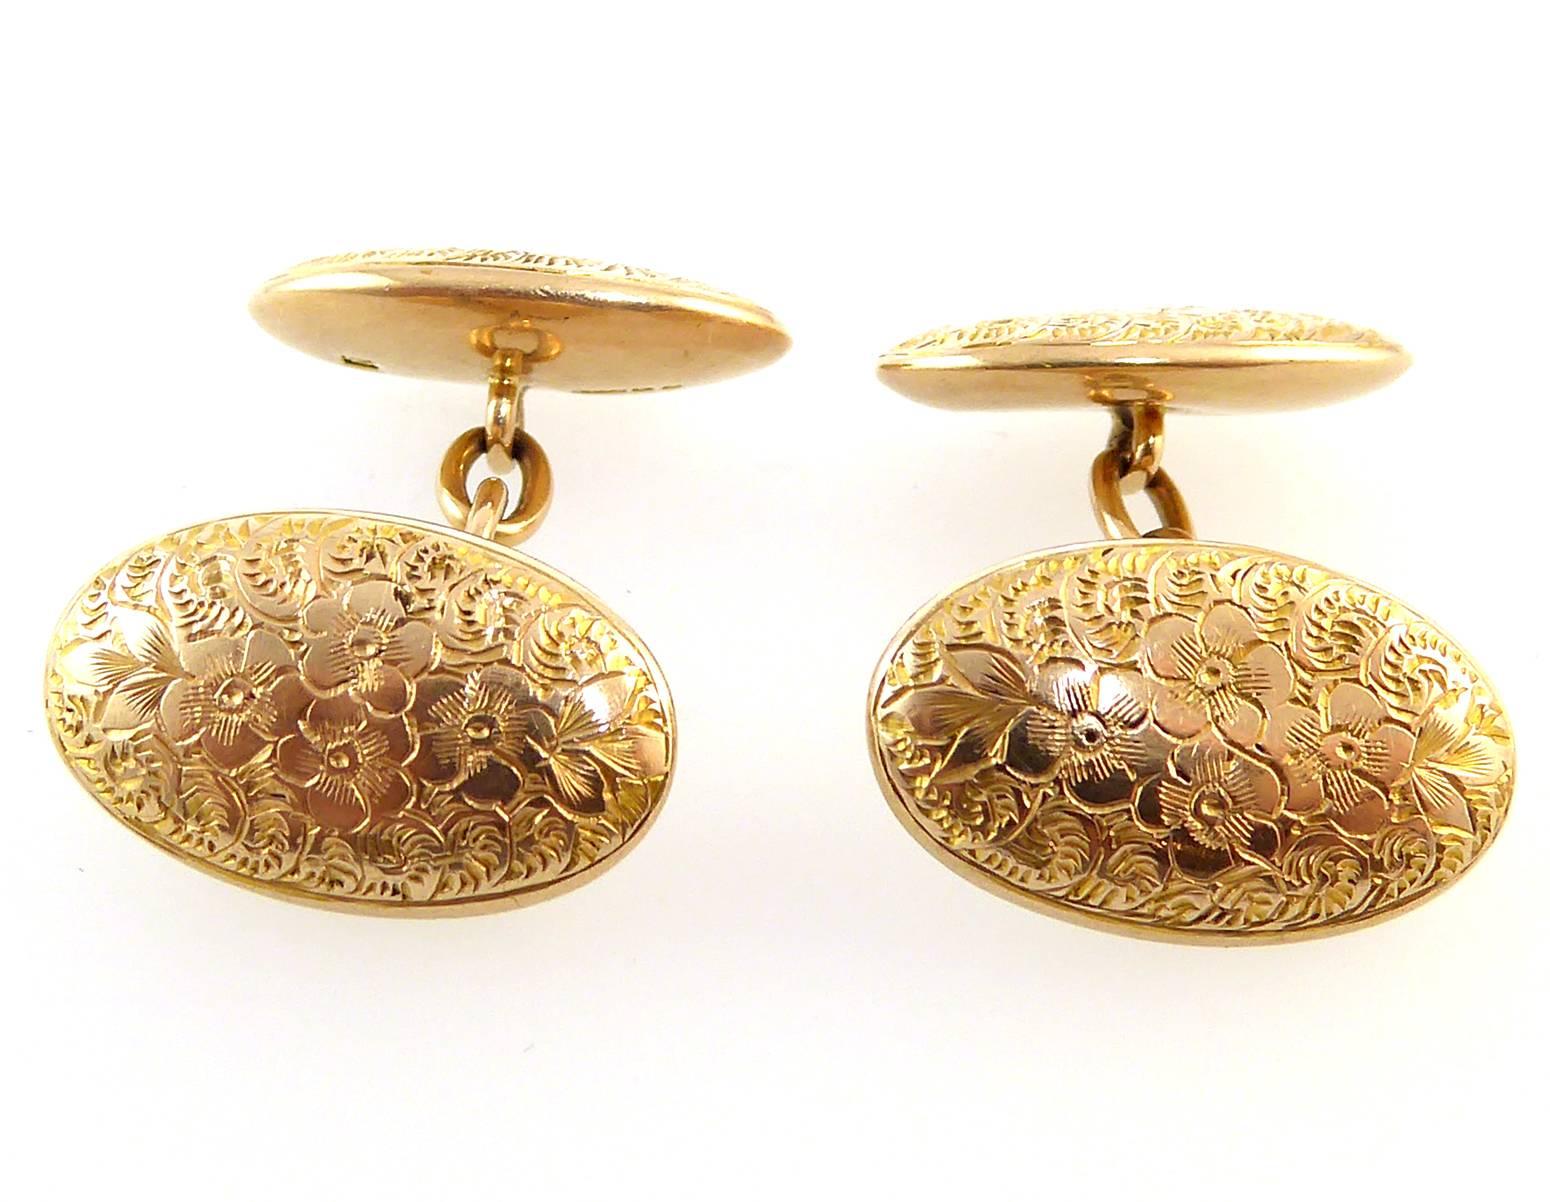 Beautifully hand engraved cufflinks with a posy of pansy-like blooms to the centre with a decorative swirl pattern edge.  The front and back of the cufflinks are very slightly domed.

Both links are engraved and are connection by oval gold links. 